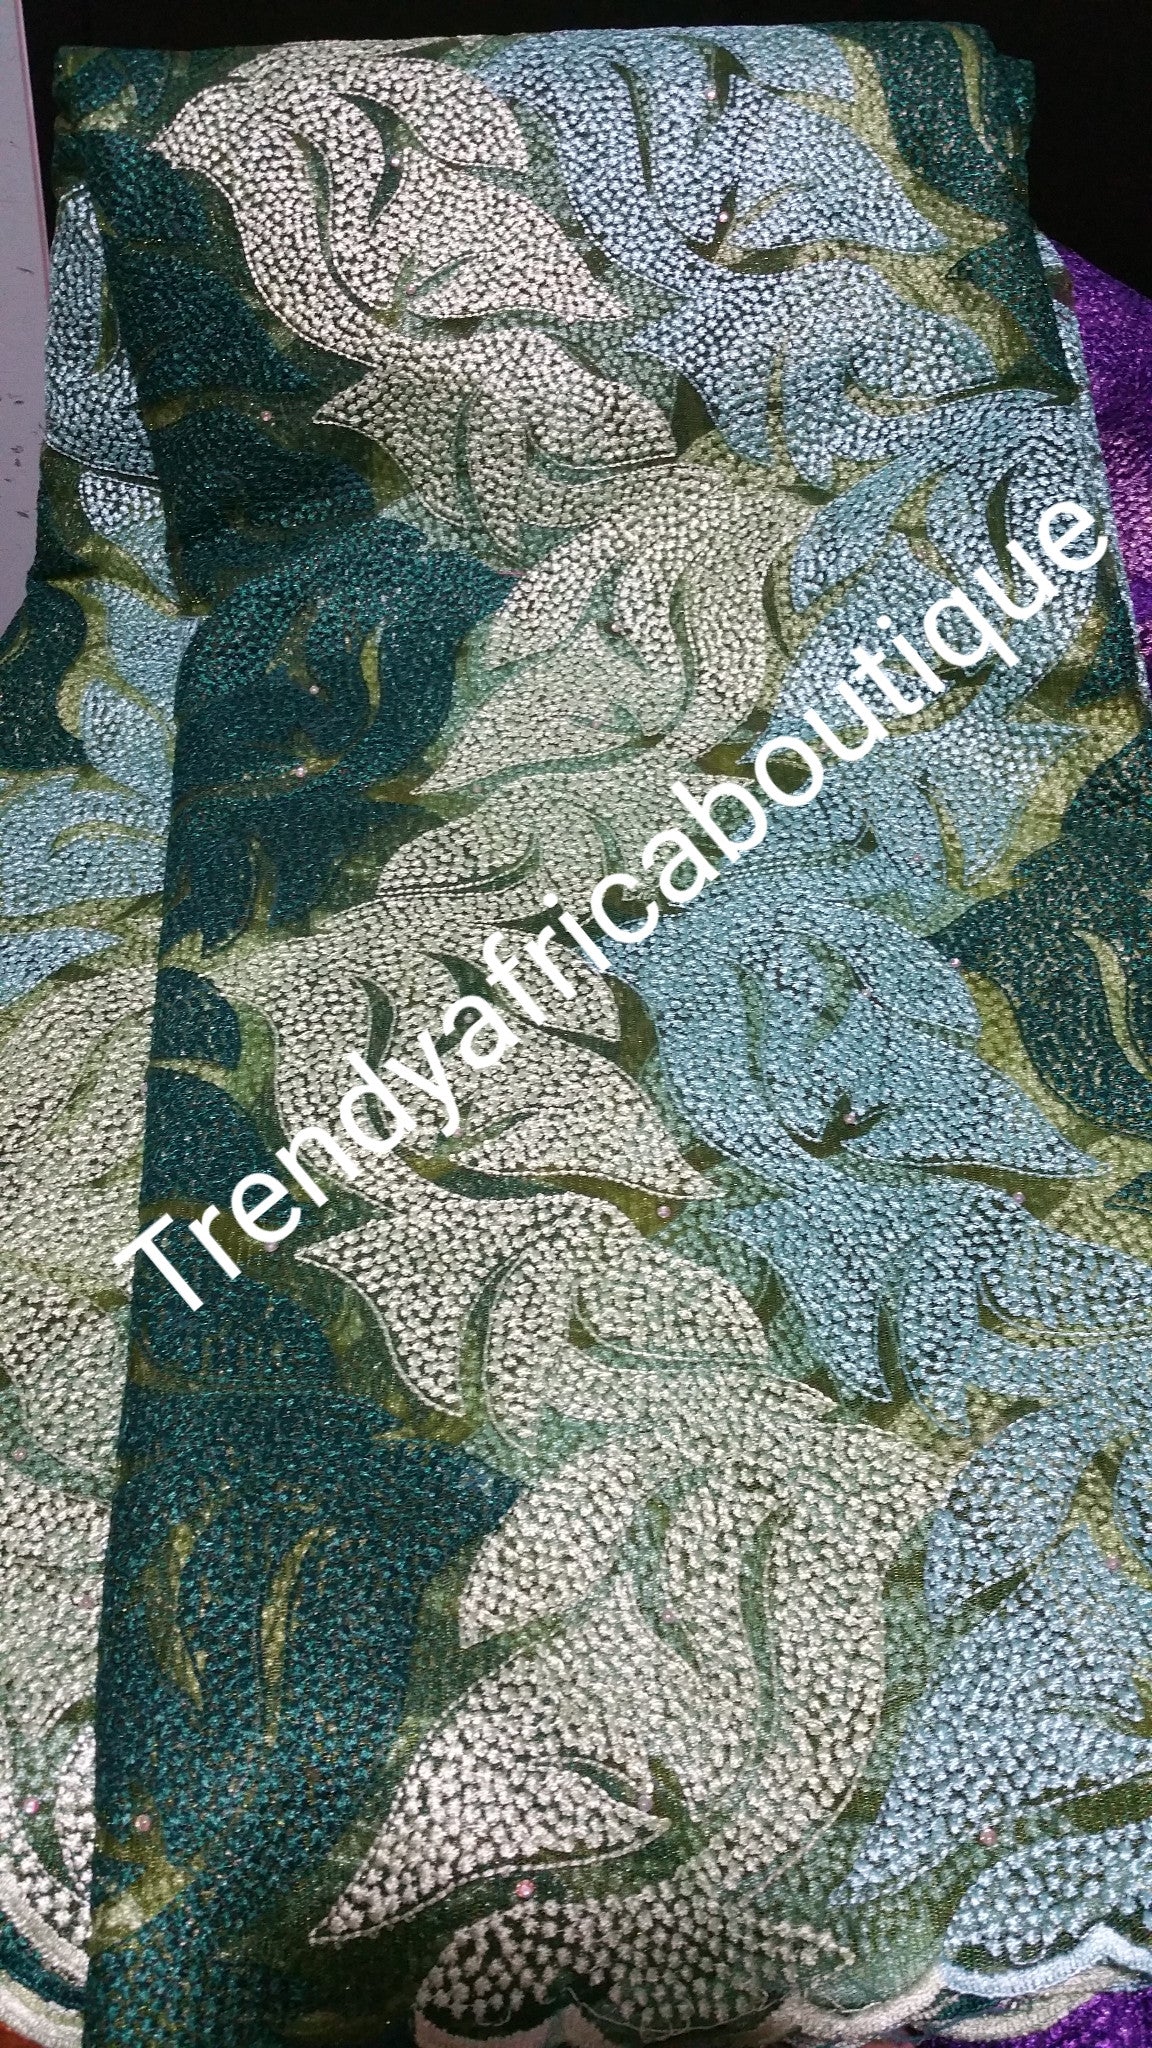 Clearance: Quality Tulle french lace fabric in olive/mint green. Sold per 5yards. Price is for 5yards